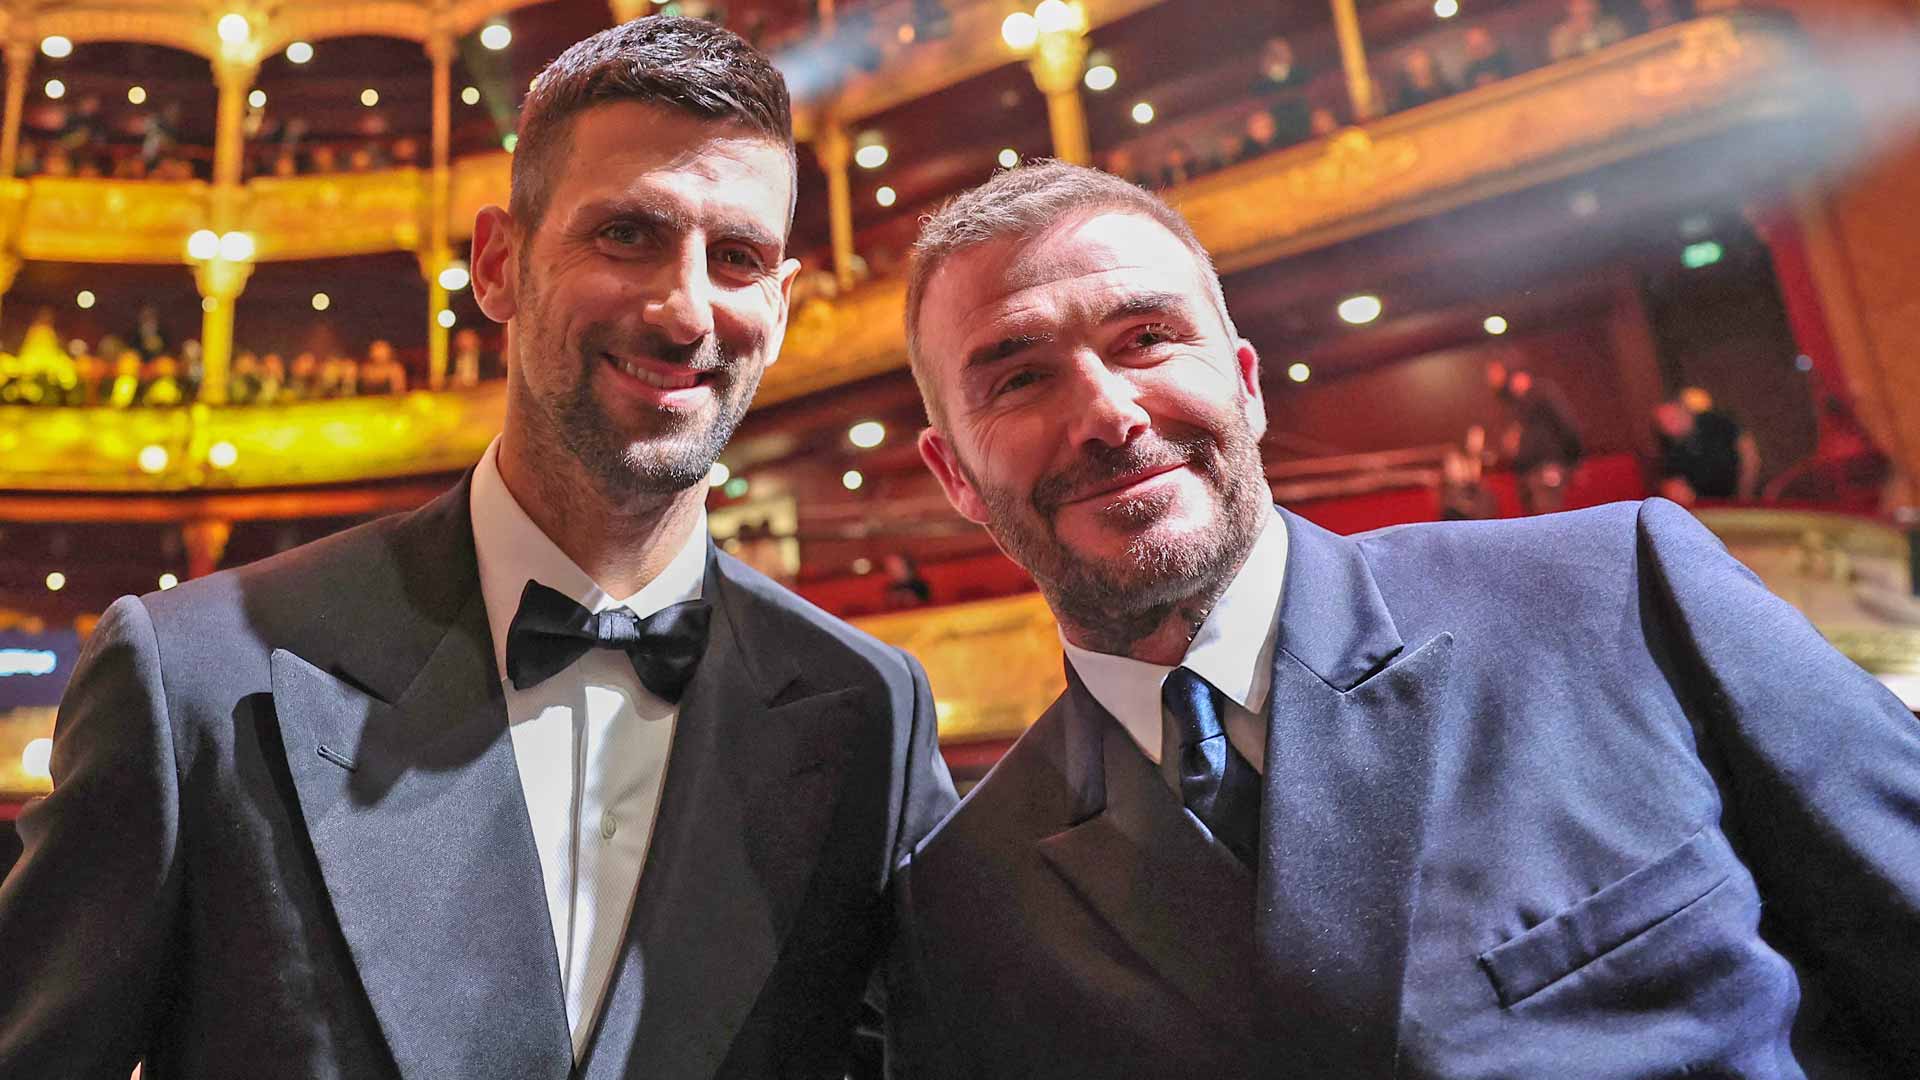 Novak Djokovic poses for a photo with David Beckham at the Ballon d'Or ceremony in Paris.